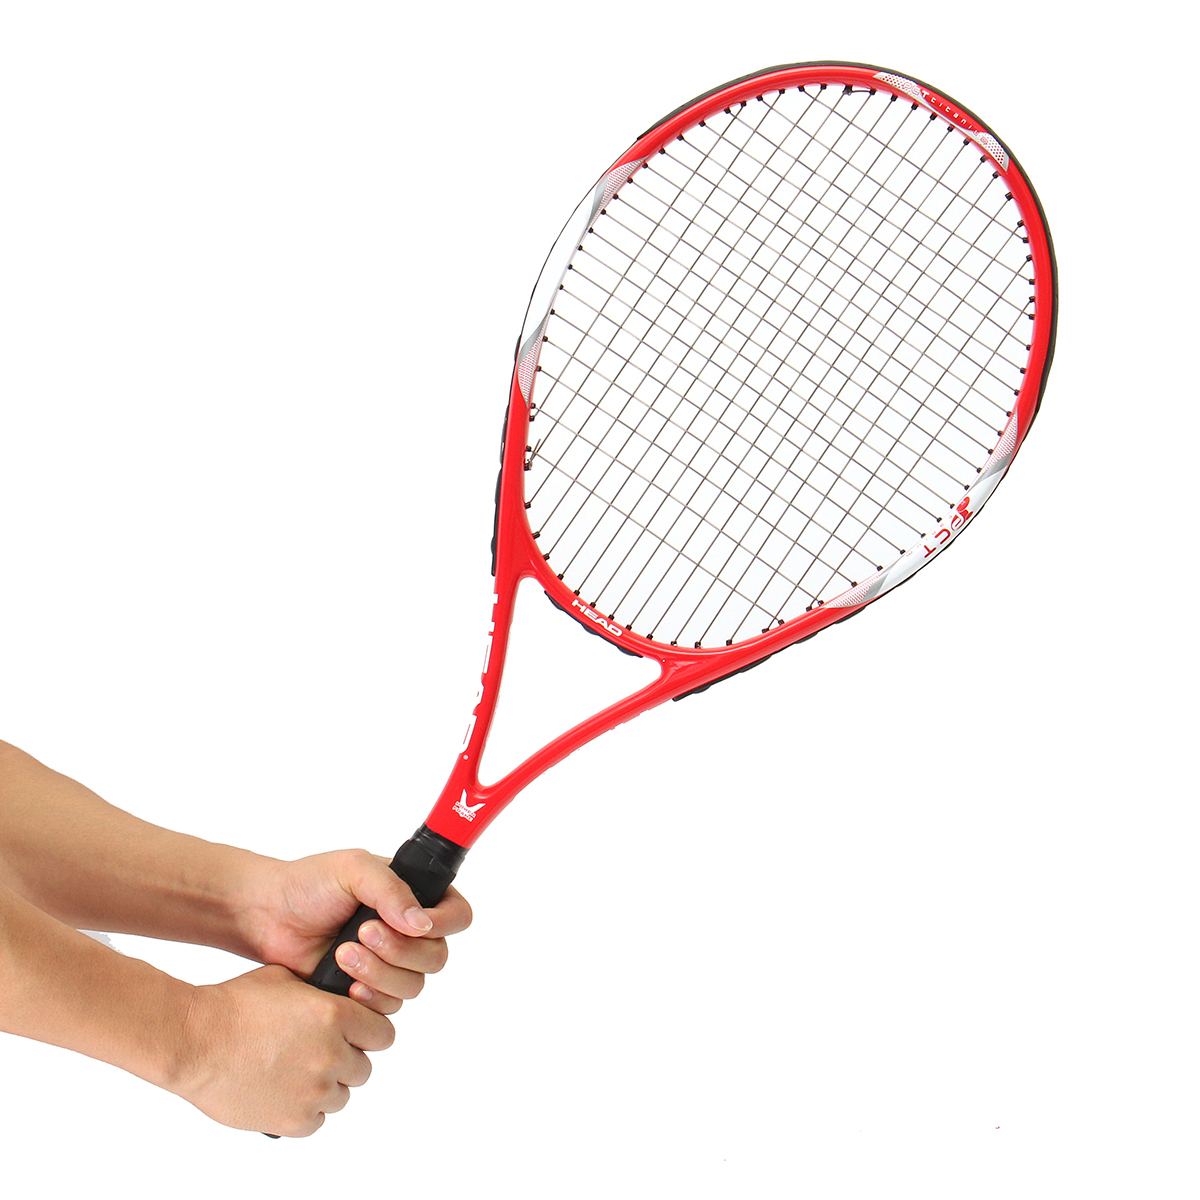 27inch-Tennis-Racket-Racquet-Carbon-Fiber-Equipped-Anti-skid-Handle-Grip-With-Bag-1216077